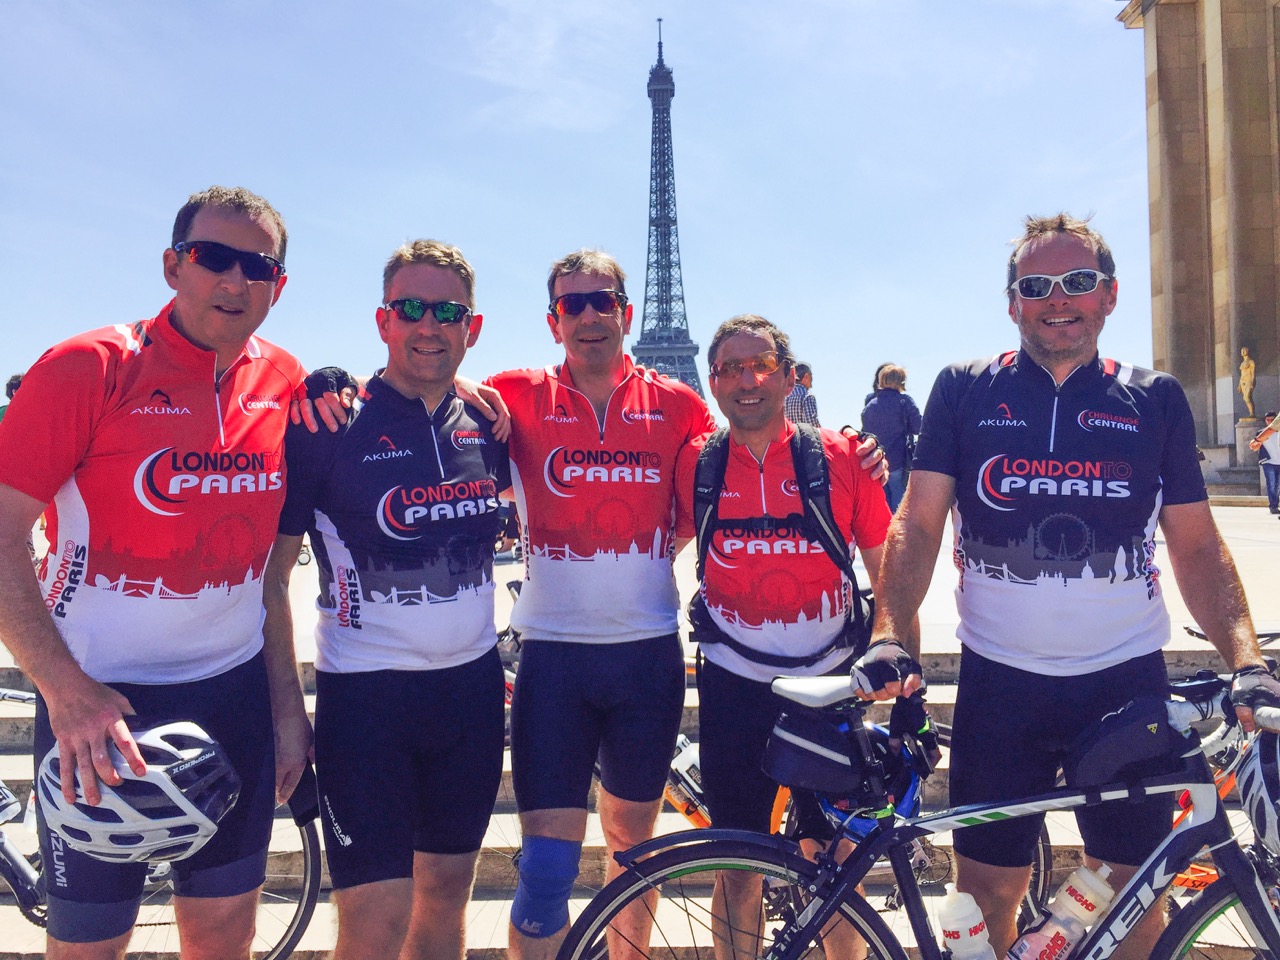 Day 3 - Cycle Tour Finish at Trocadero  